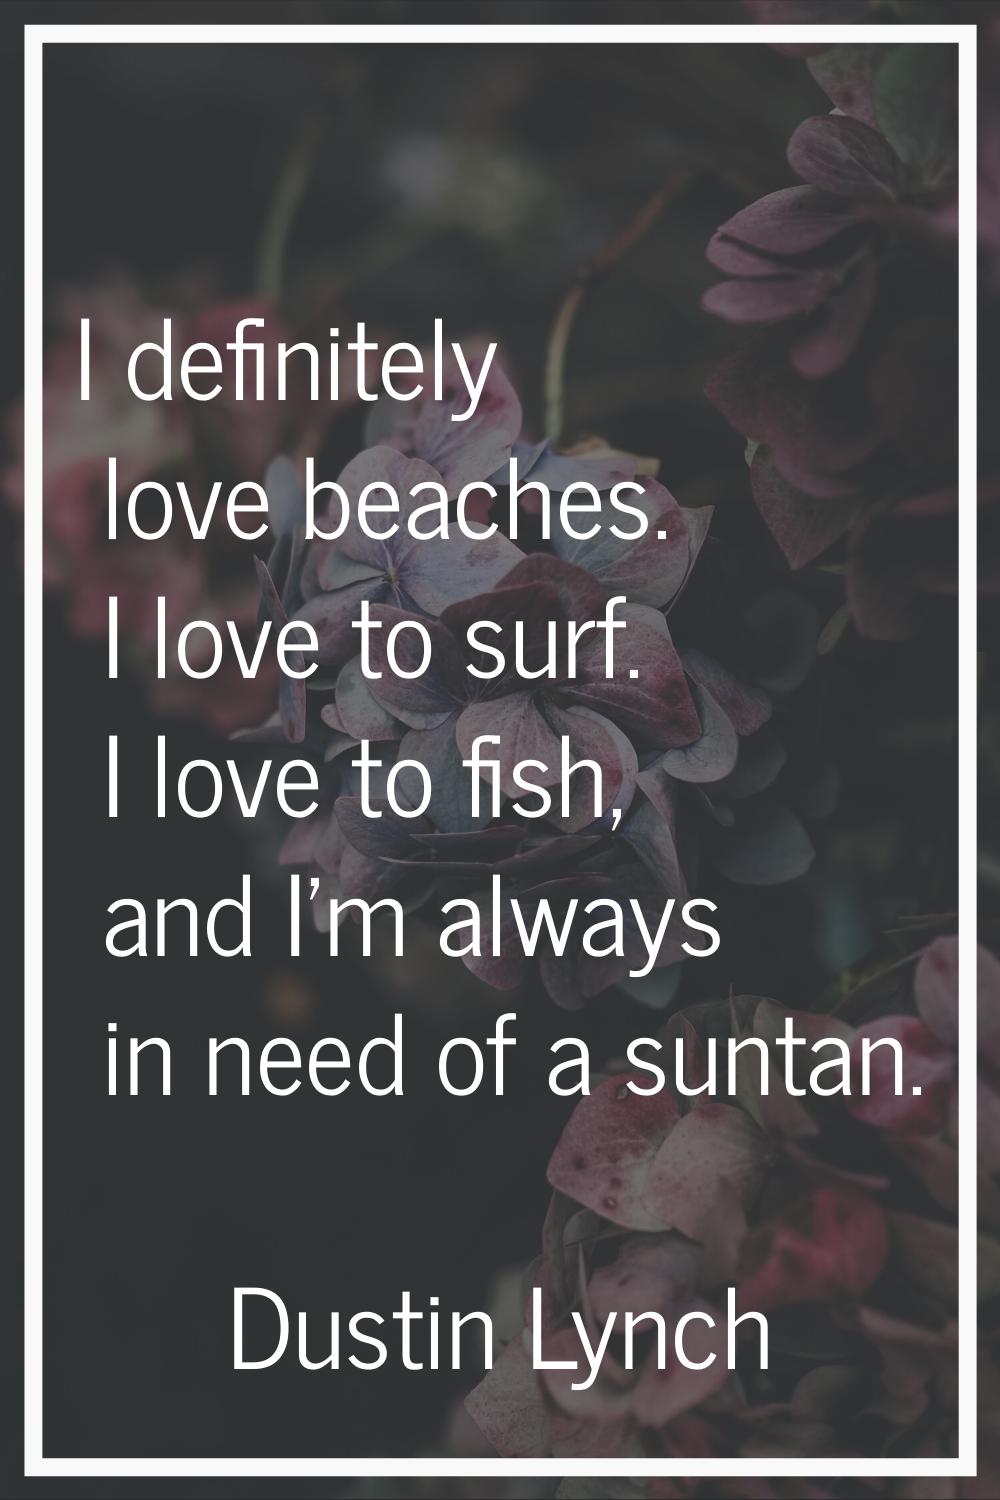 I definitely love beaches. I love to surf. I love to fish, and I'm always in need of a suntan.